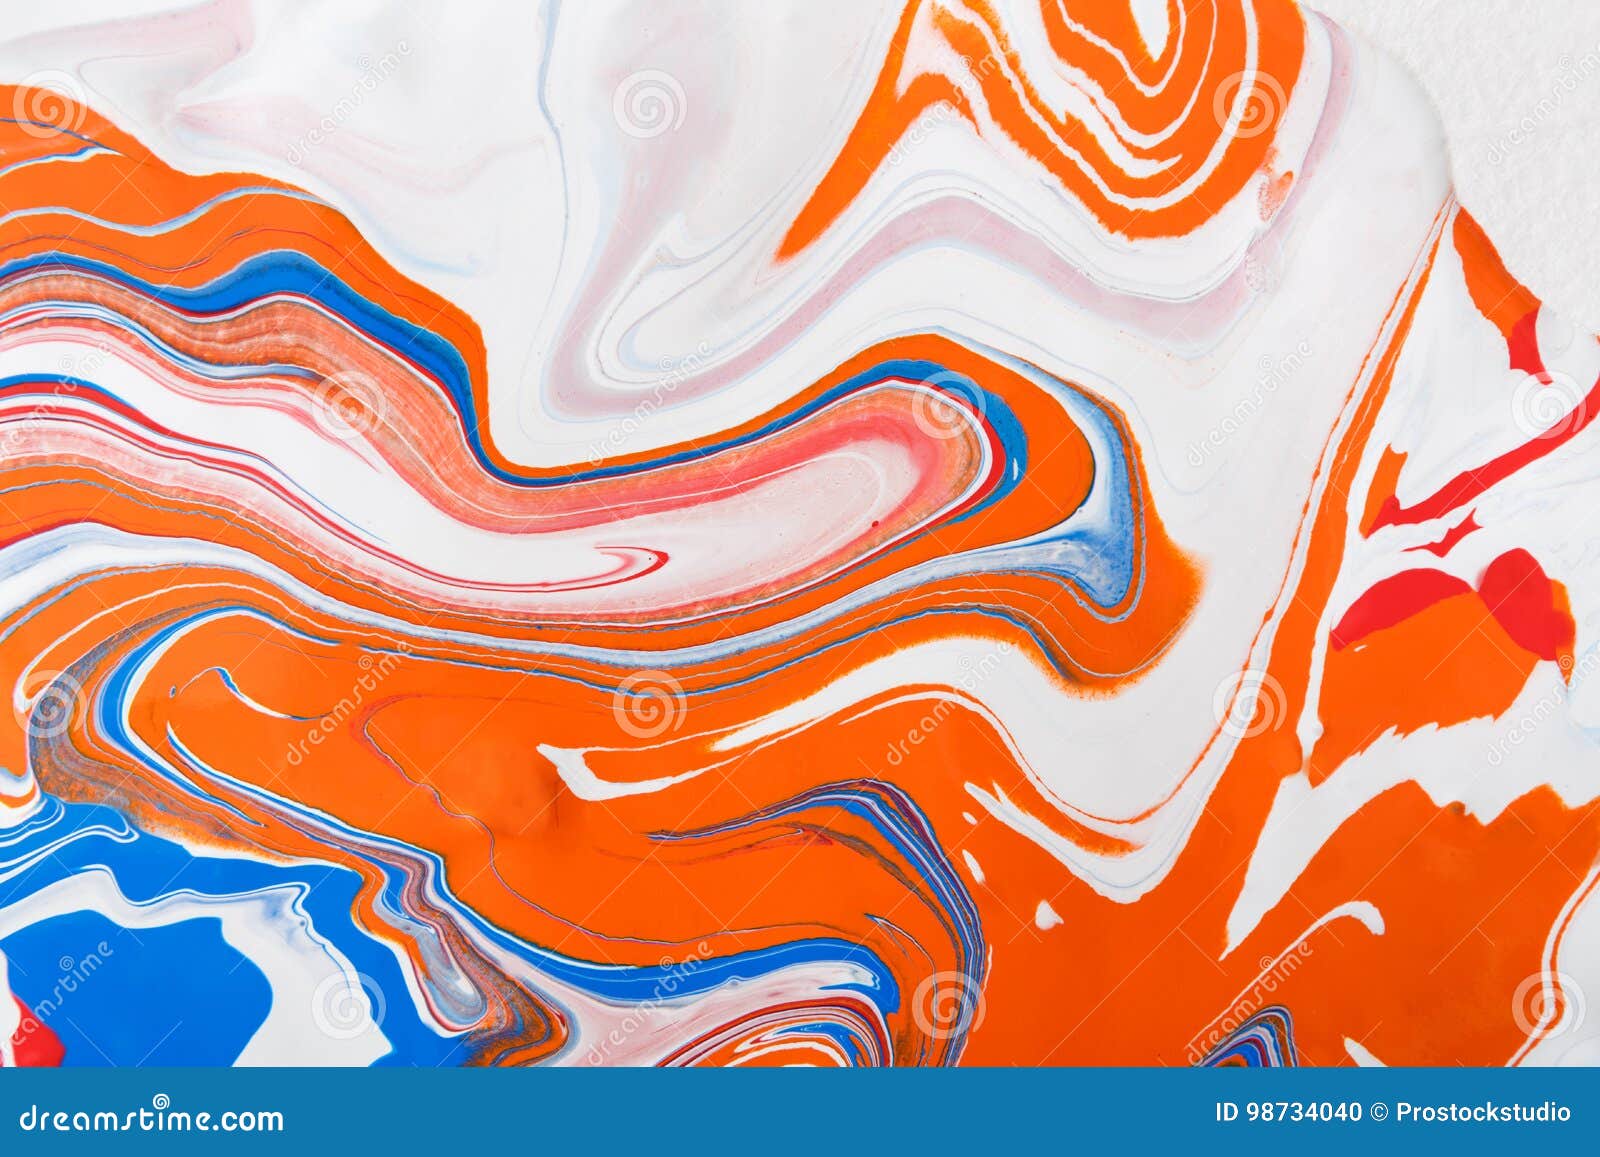 Liquid Marbling Acrylic Paint Background. Fluid Painting Abstract Texture  Stock Photo - Image of bright, contemporary: 98734040